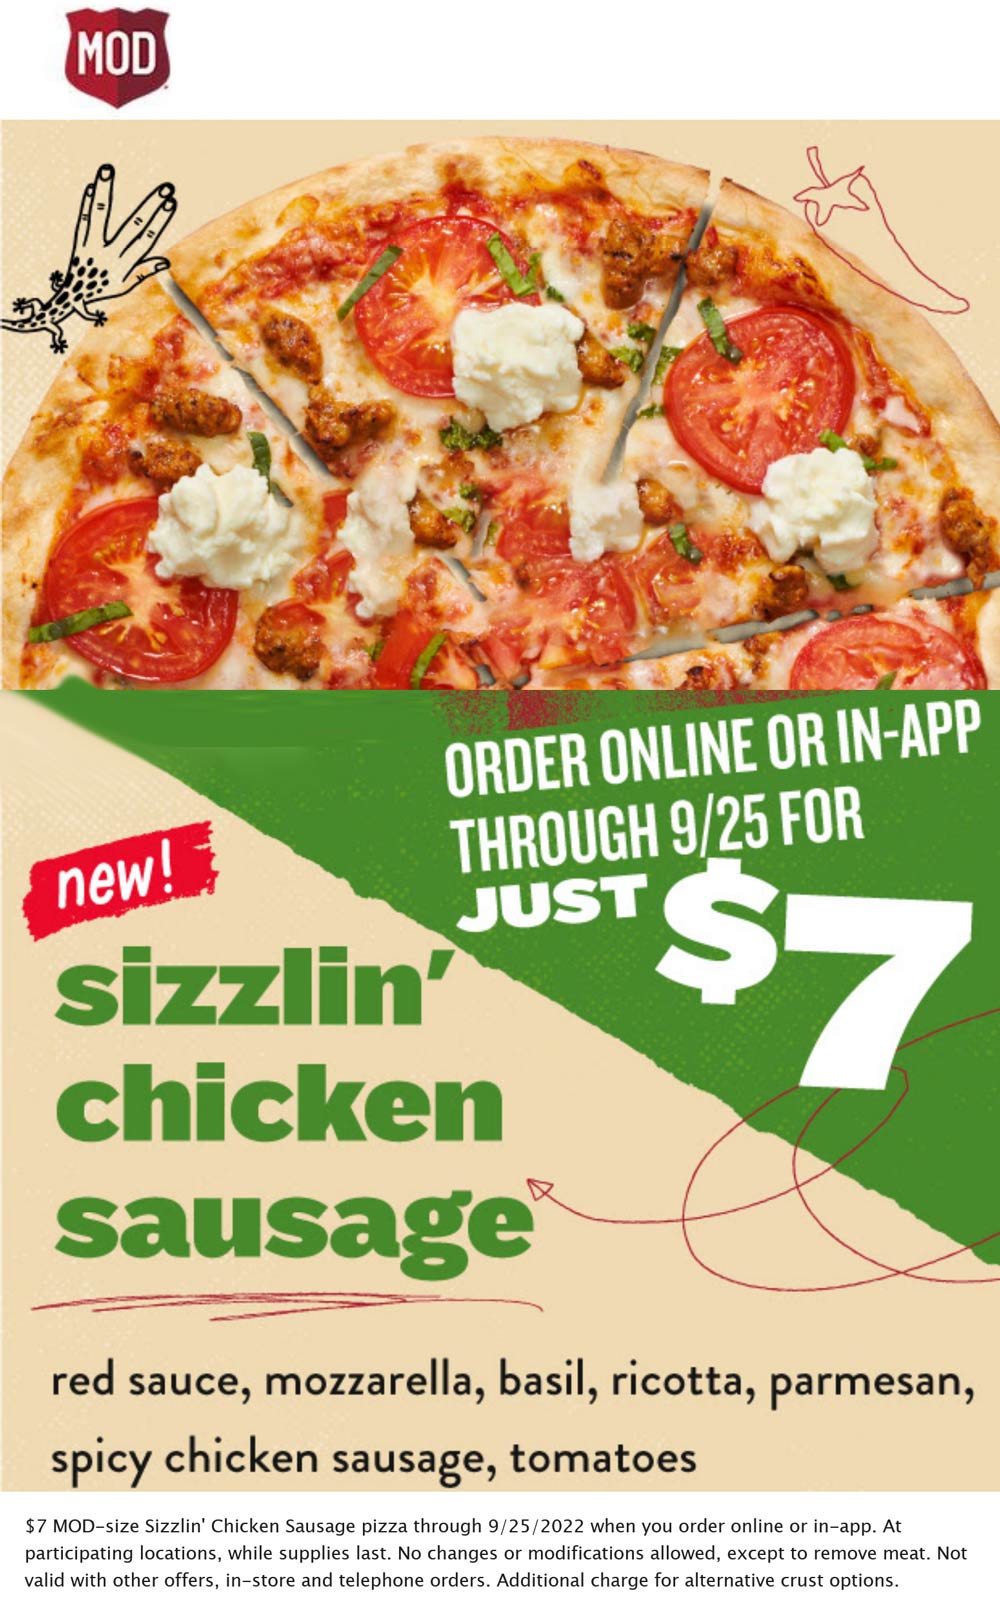 MOD restaurants Coupon  Sizzlin chicken sausage pizza for $7 online at MOD #mod 